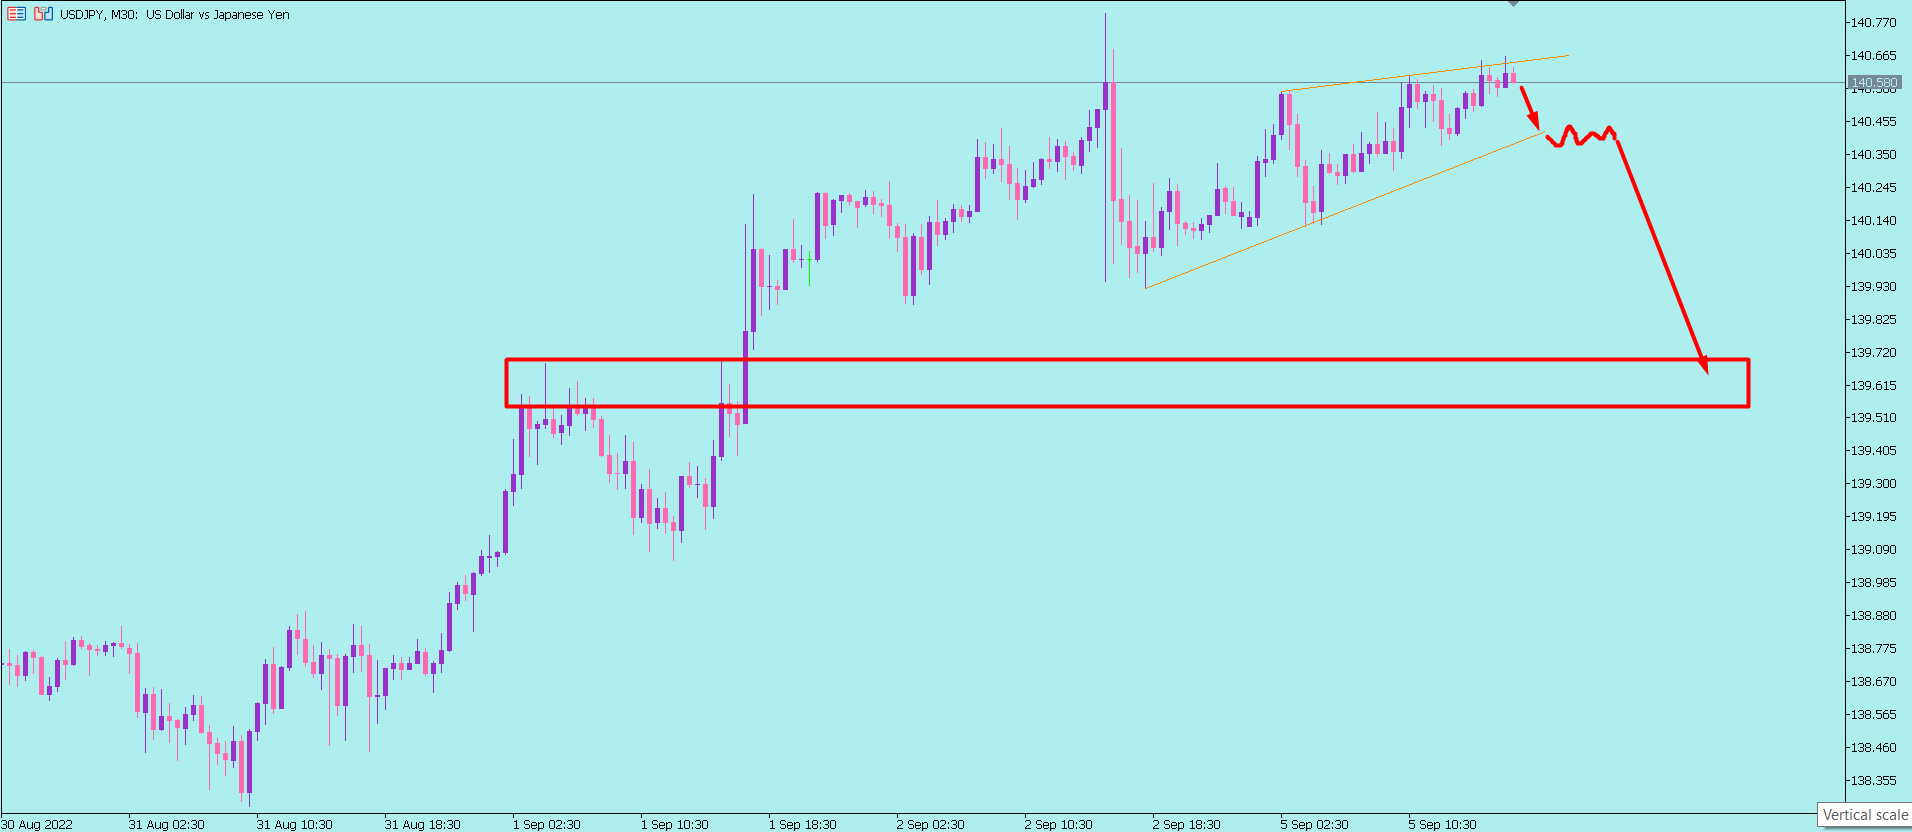 USD/JPY M30 Price Action